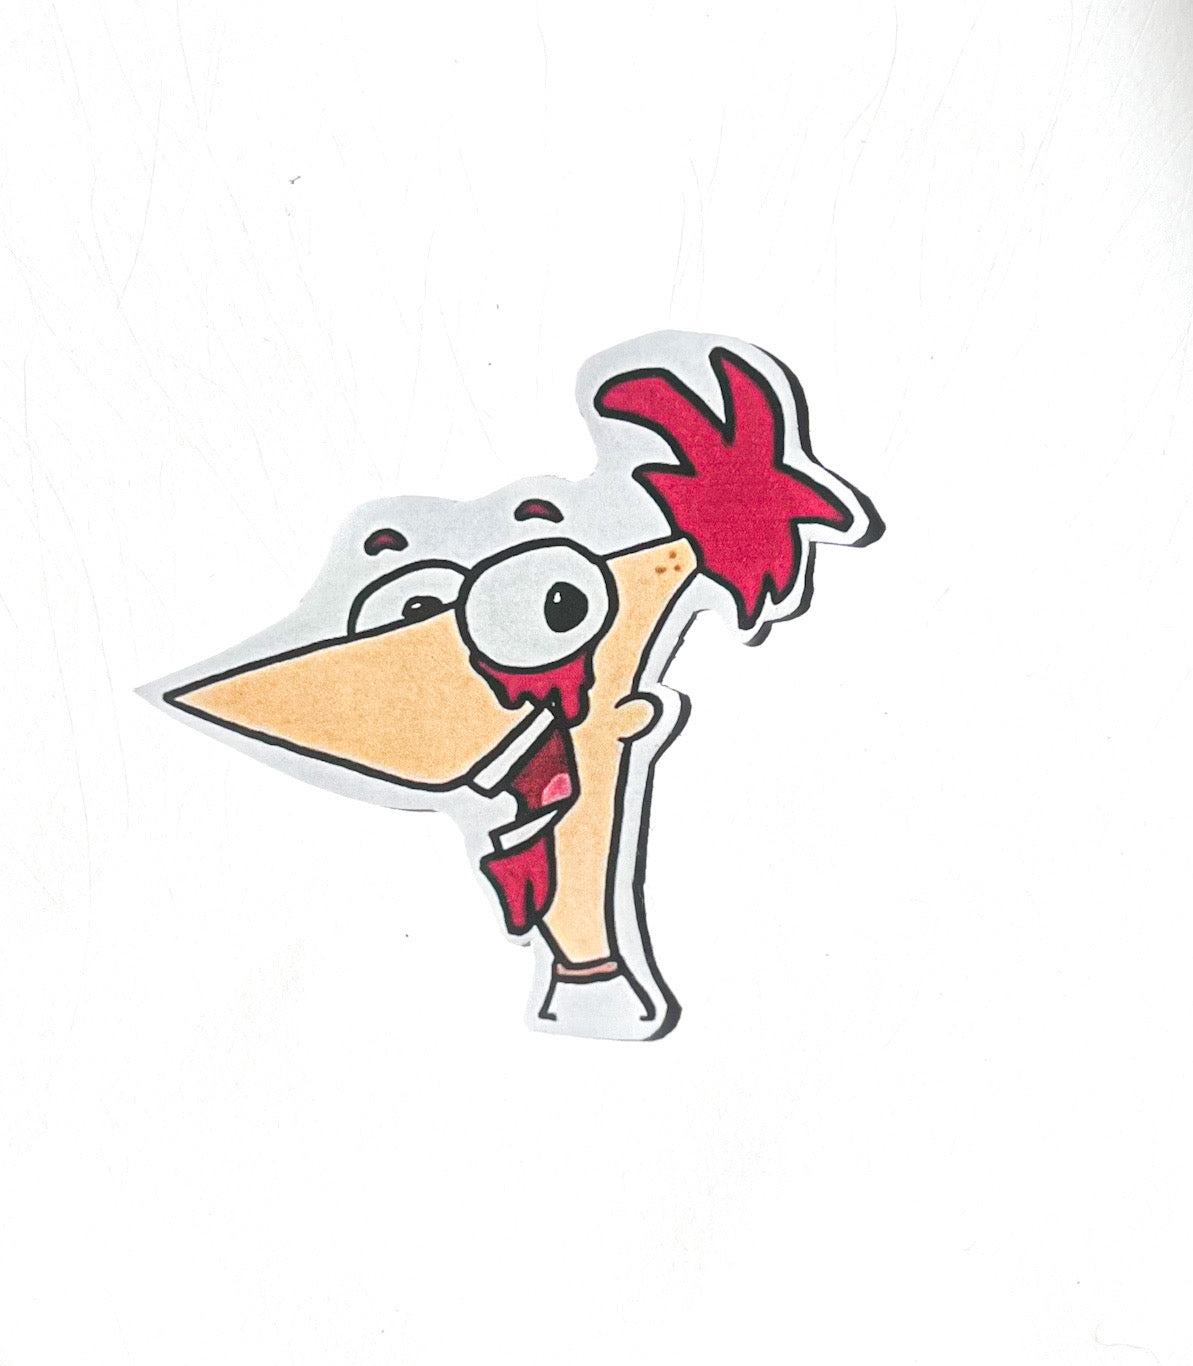 Phineas and Ferb stickers